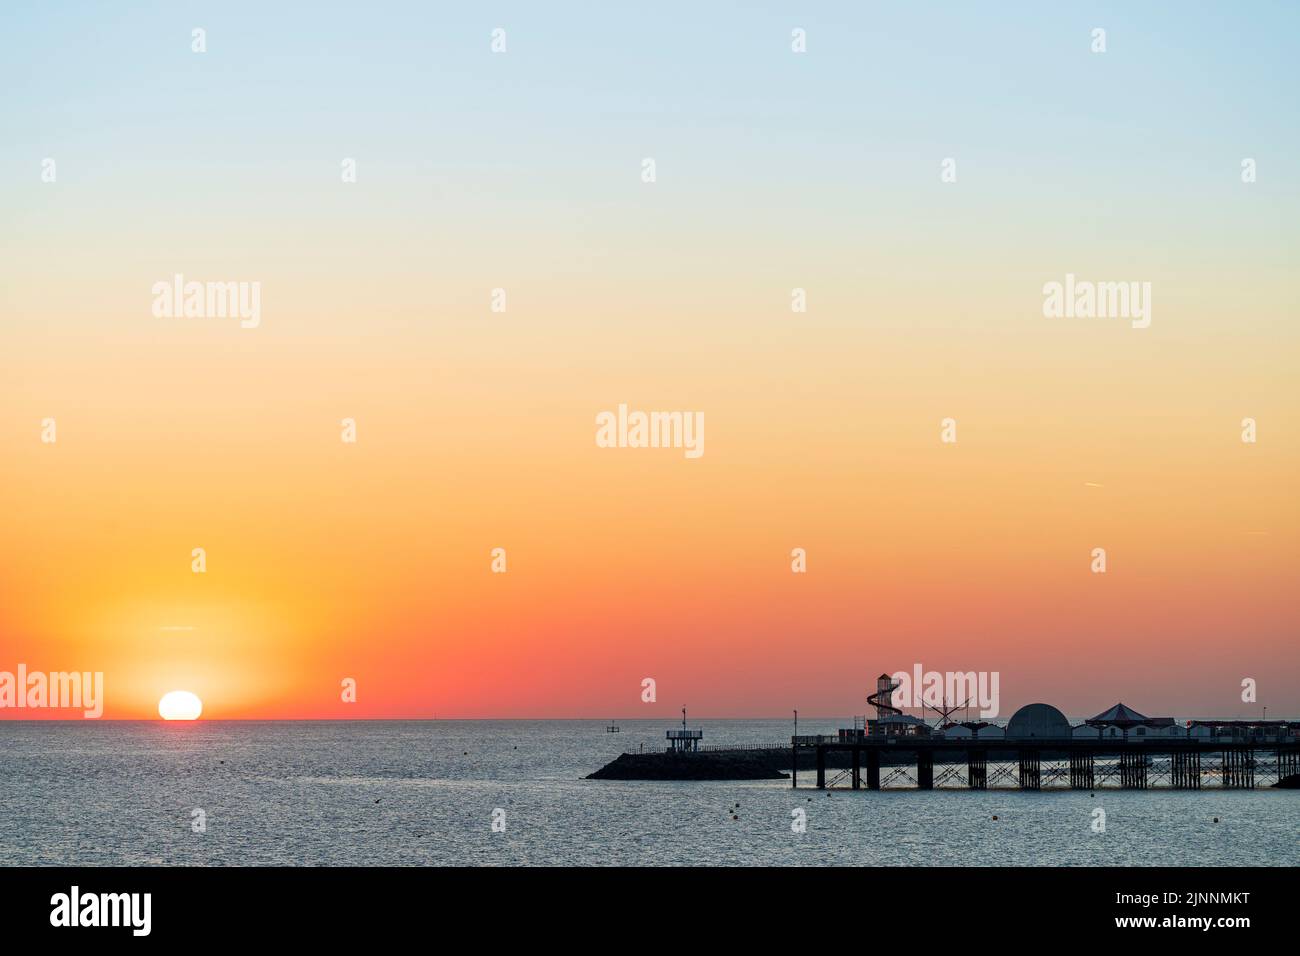 Sunrise over the North sea at Herne Bay in Kent. Sun rising above the sea with the silhouette of the Herne Bay pier and harbour jetty. Sky is orange turning gradually into blue. Stock Photo